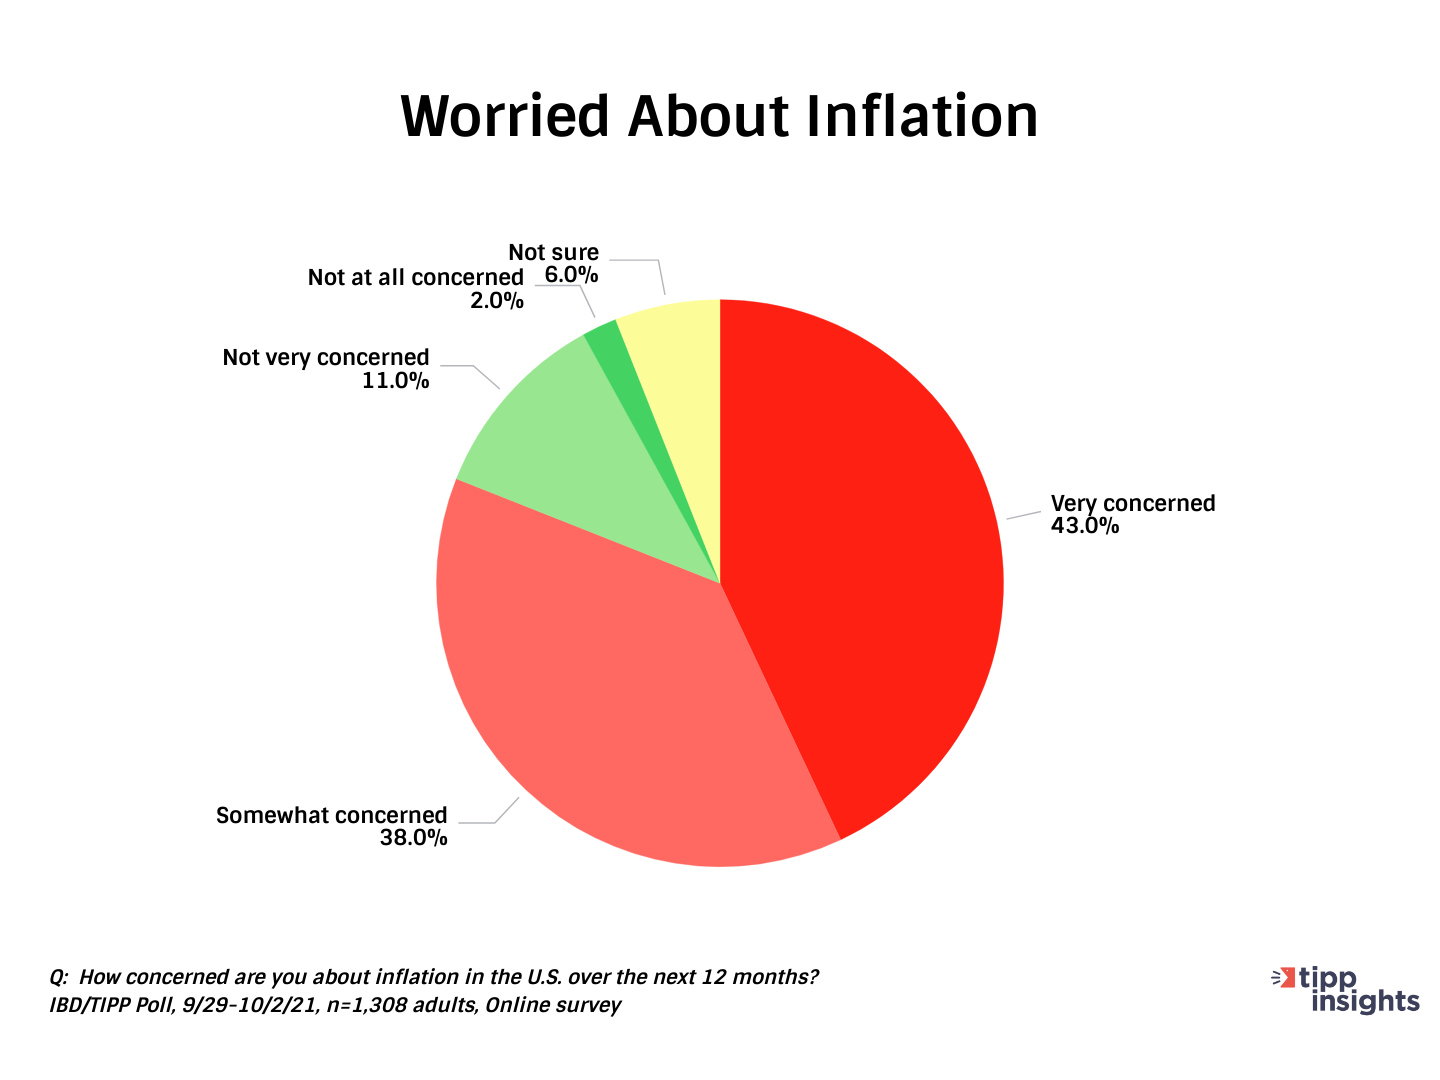 IBD/TIPP Economic Optimism Index: Americans and their level of concern with Inflation